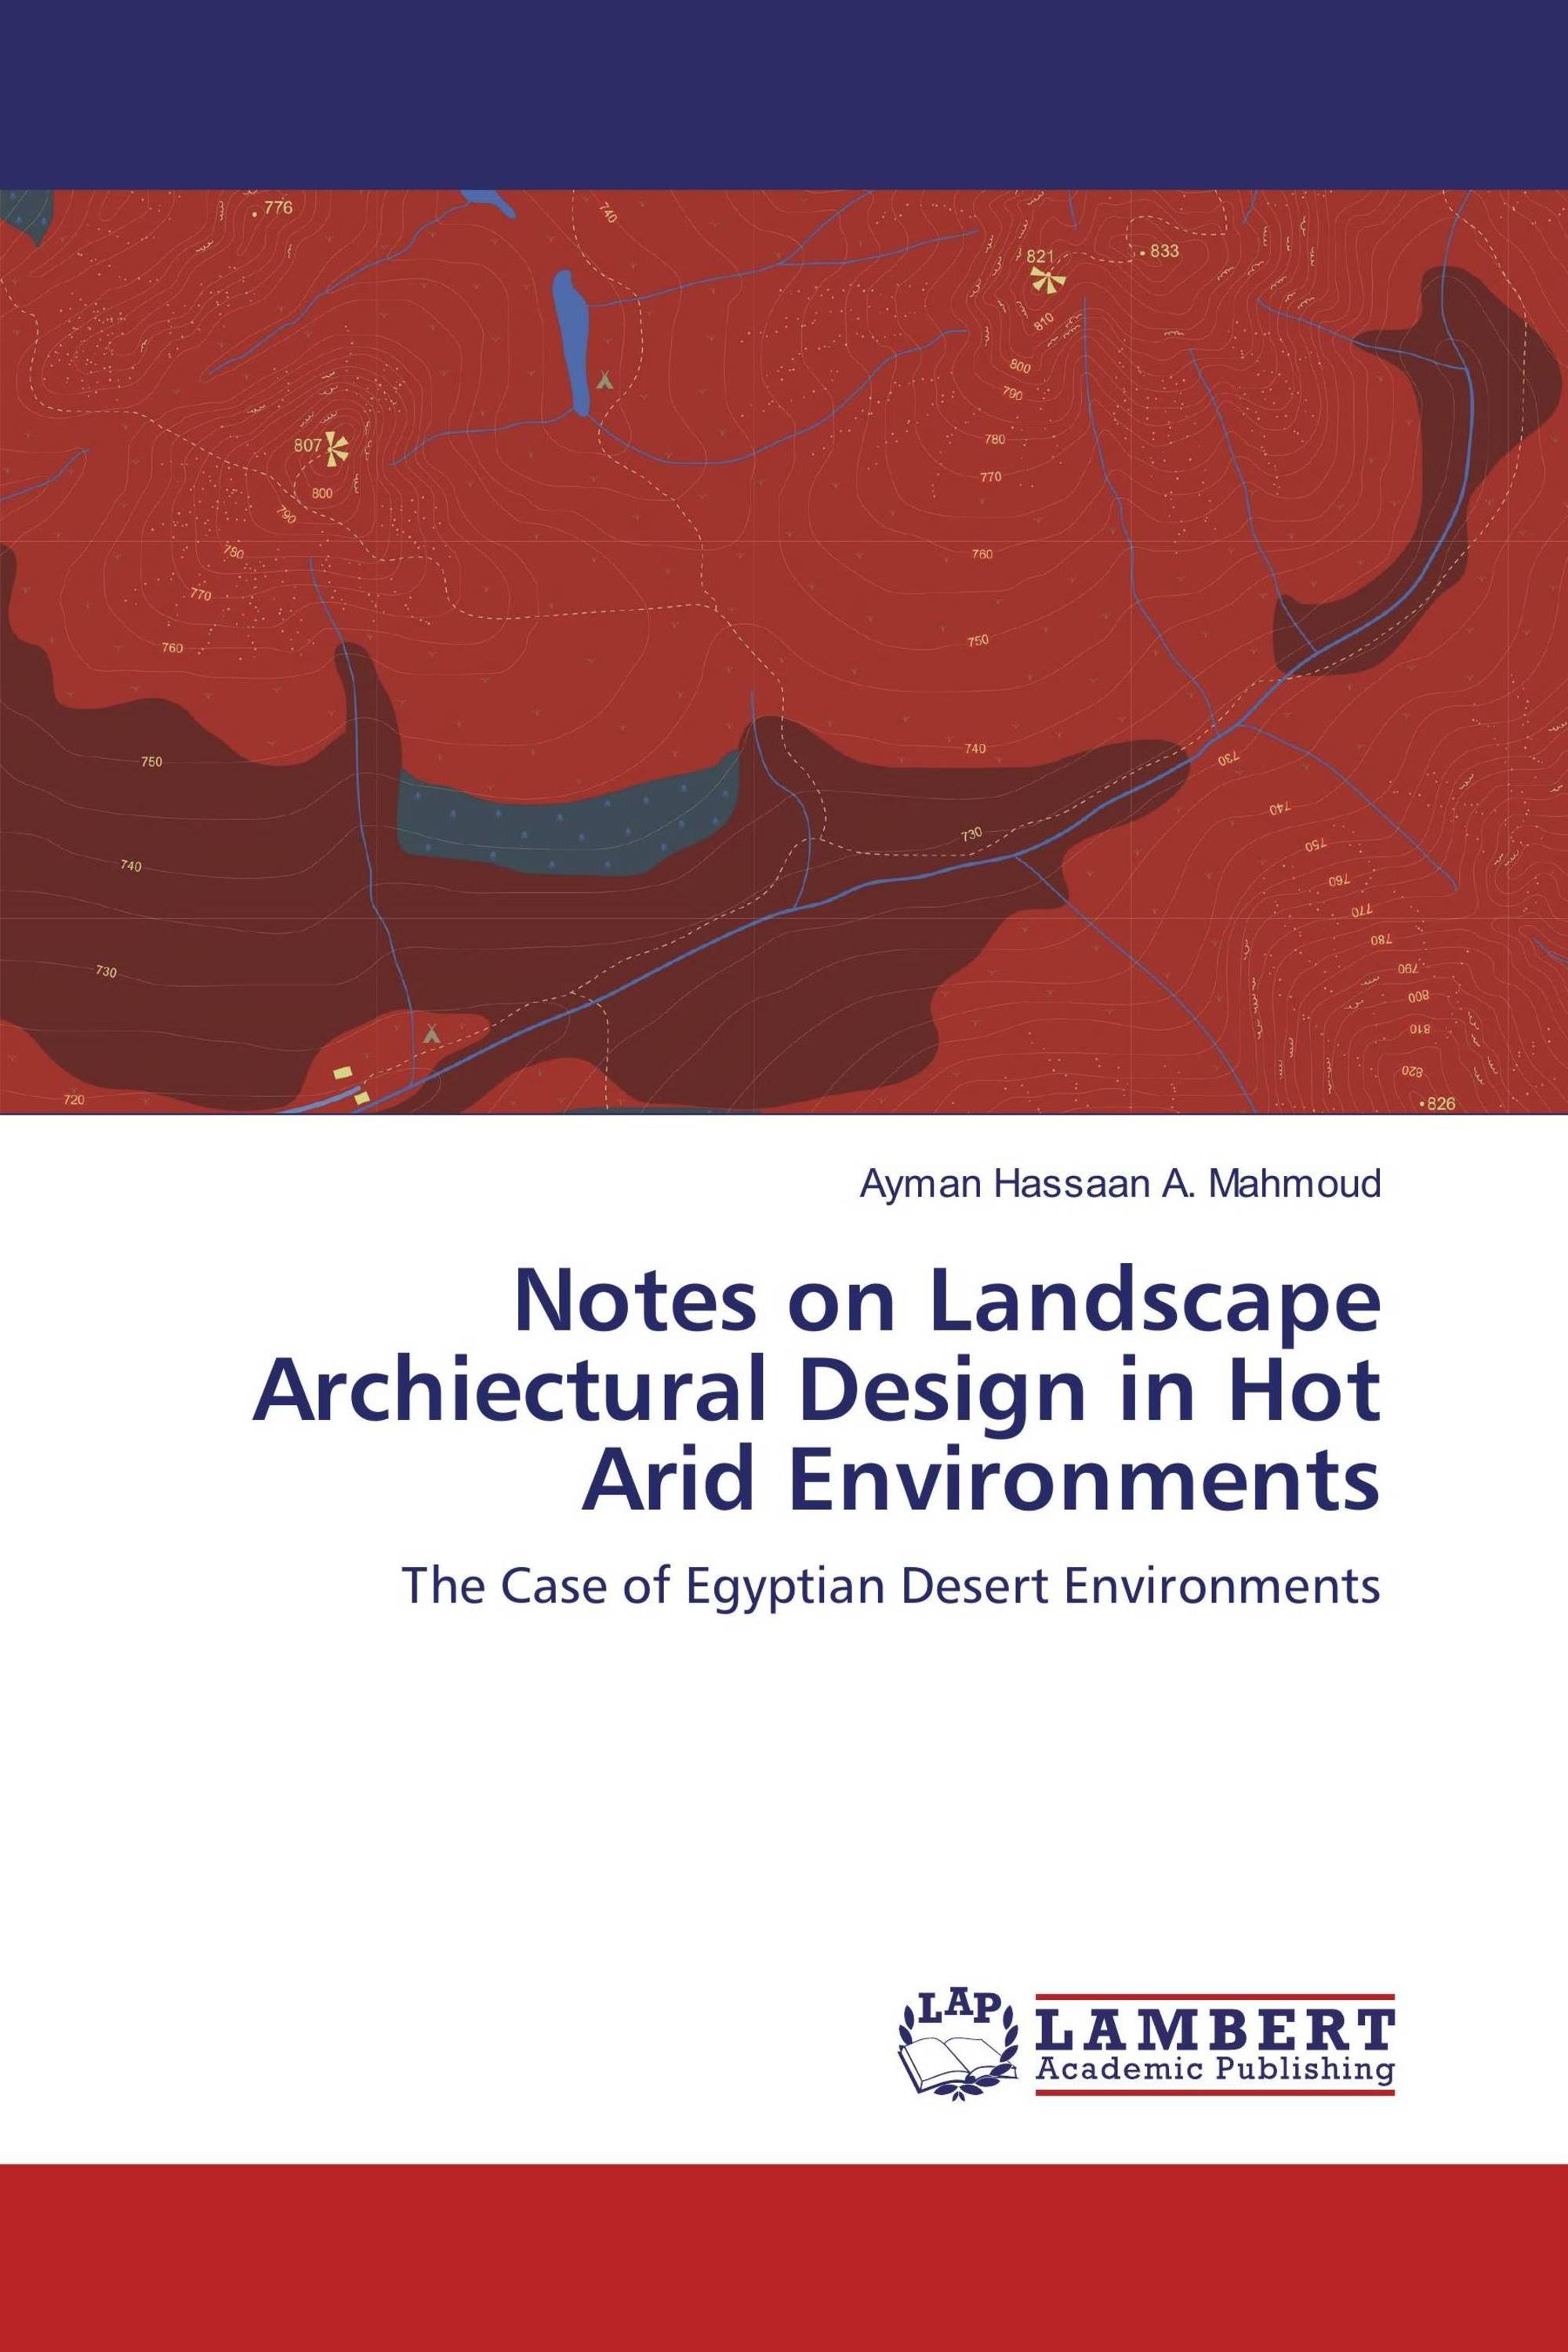 Notes on Landscape Archiectural Design in Hot Arid Environments